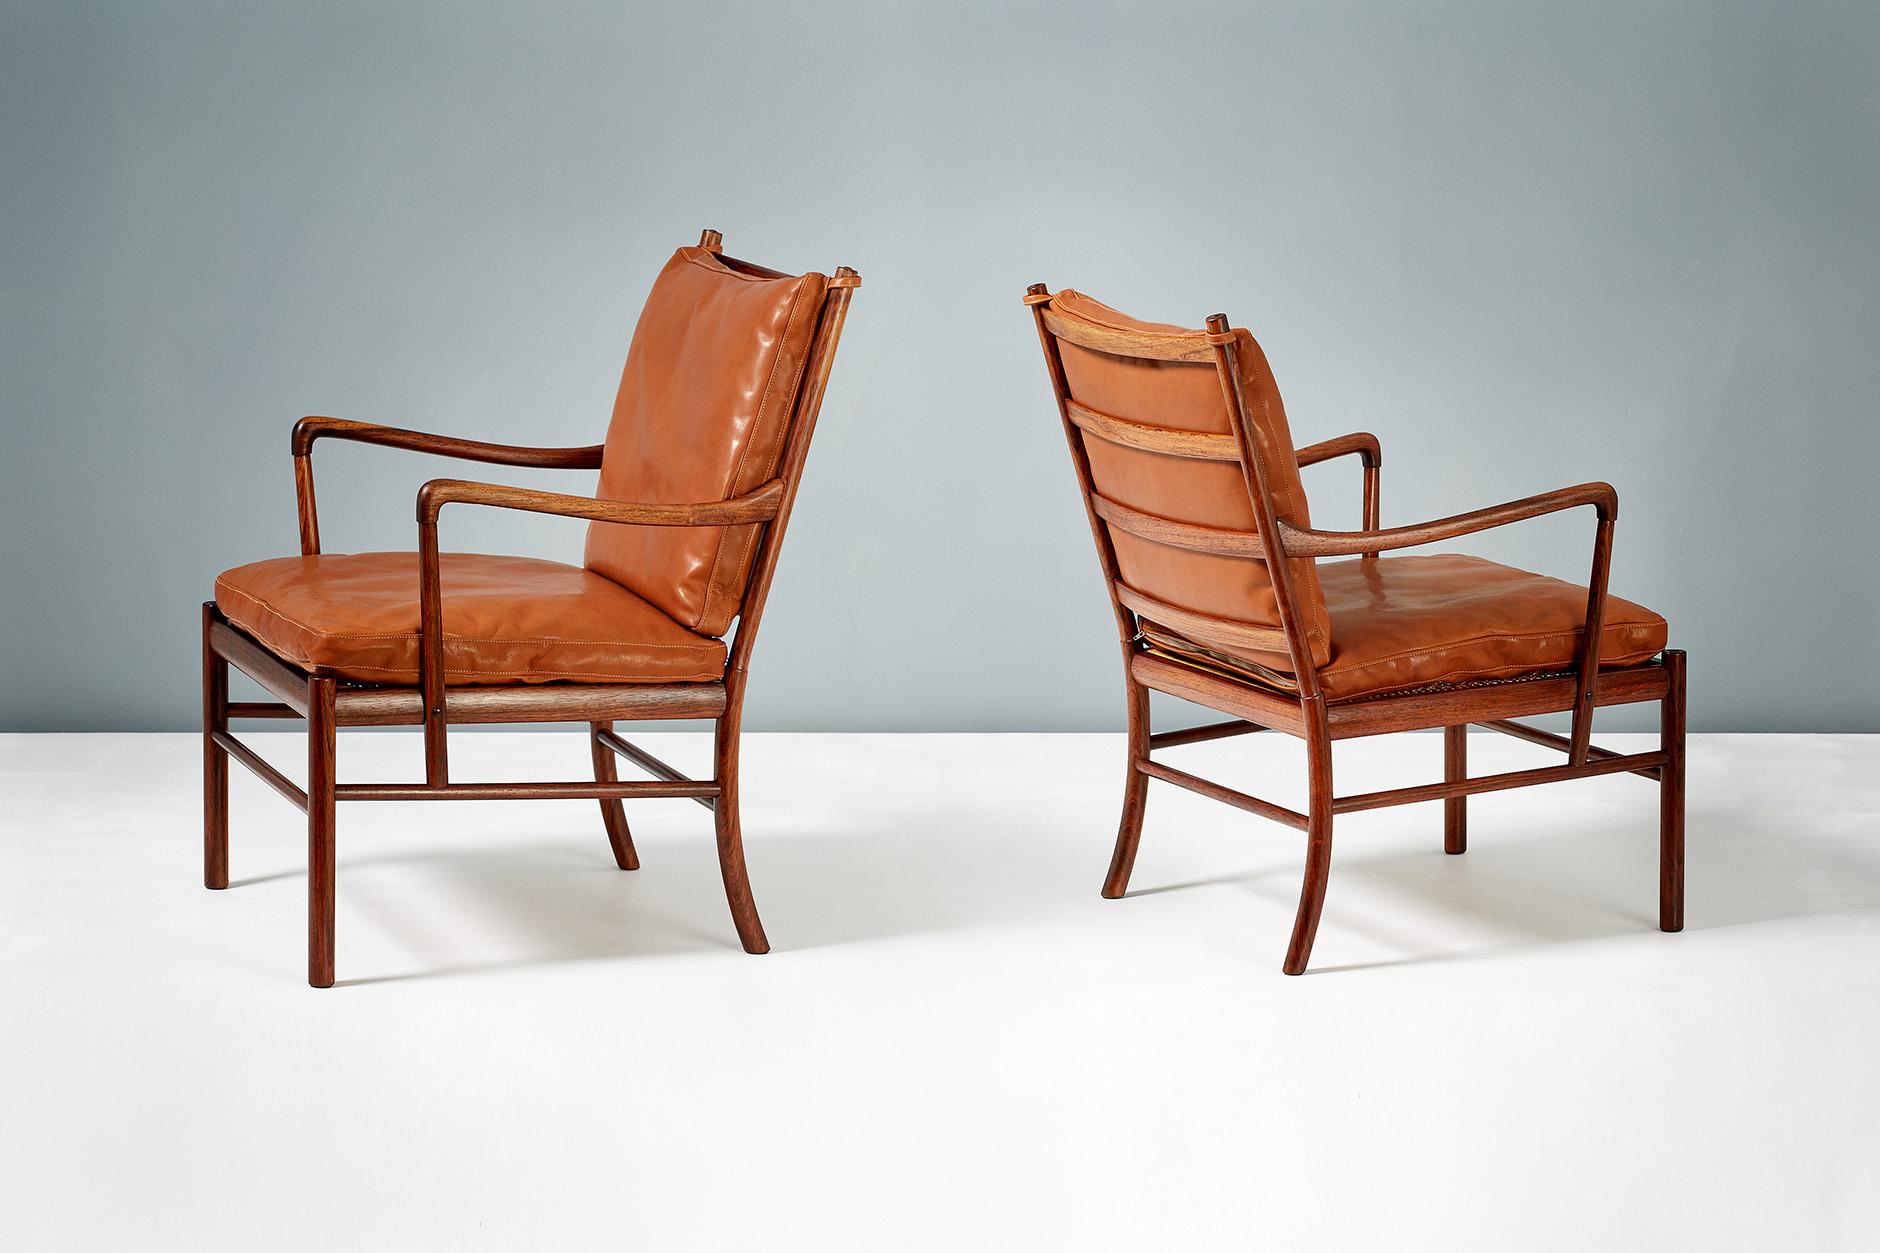 Ole Wanscher Pair of Rosewood Colonial Chairs, 1950s For Sale 1